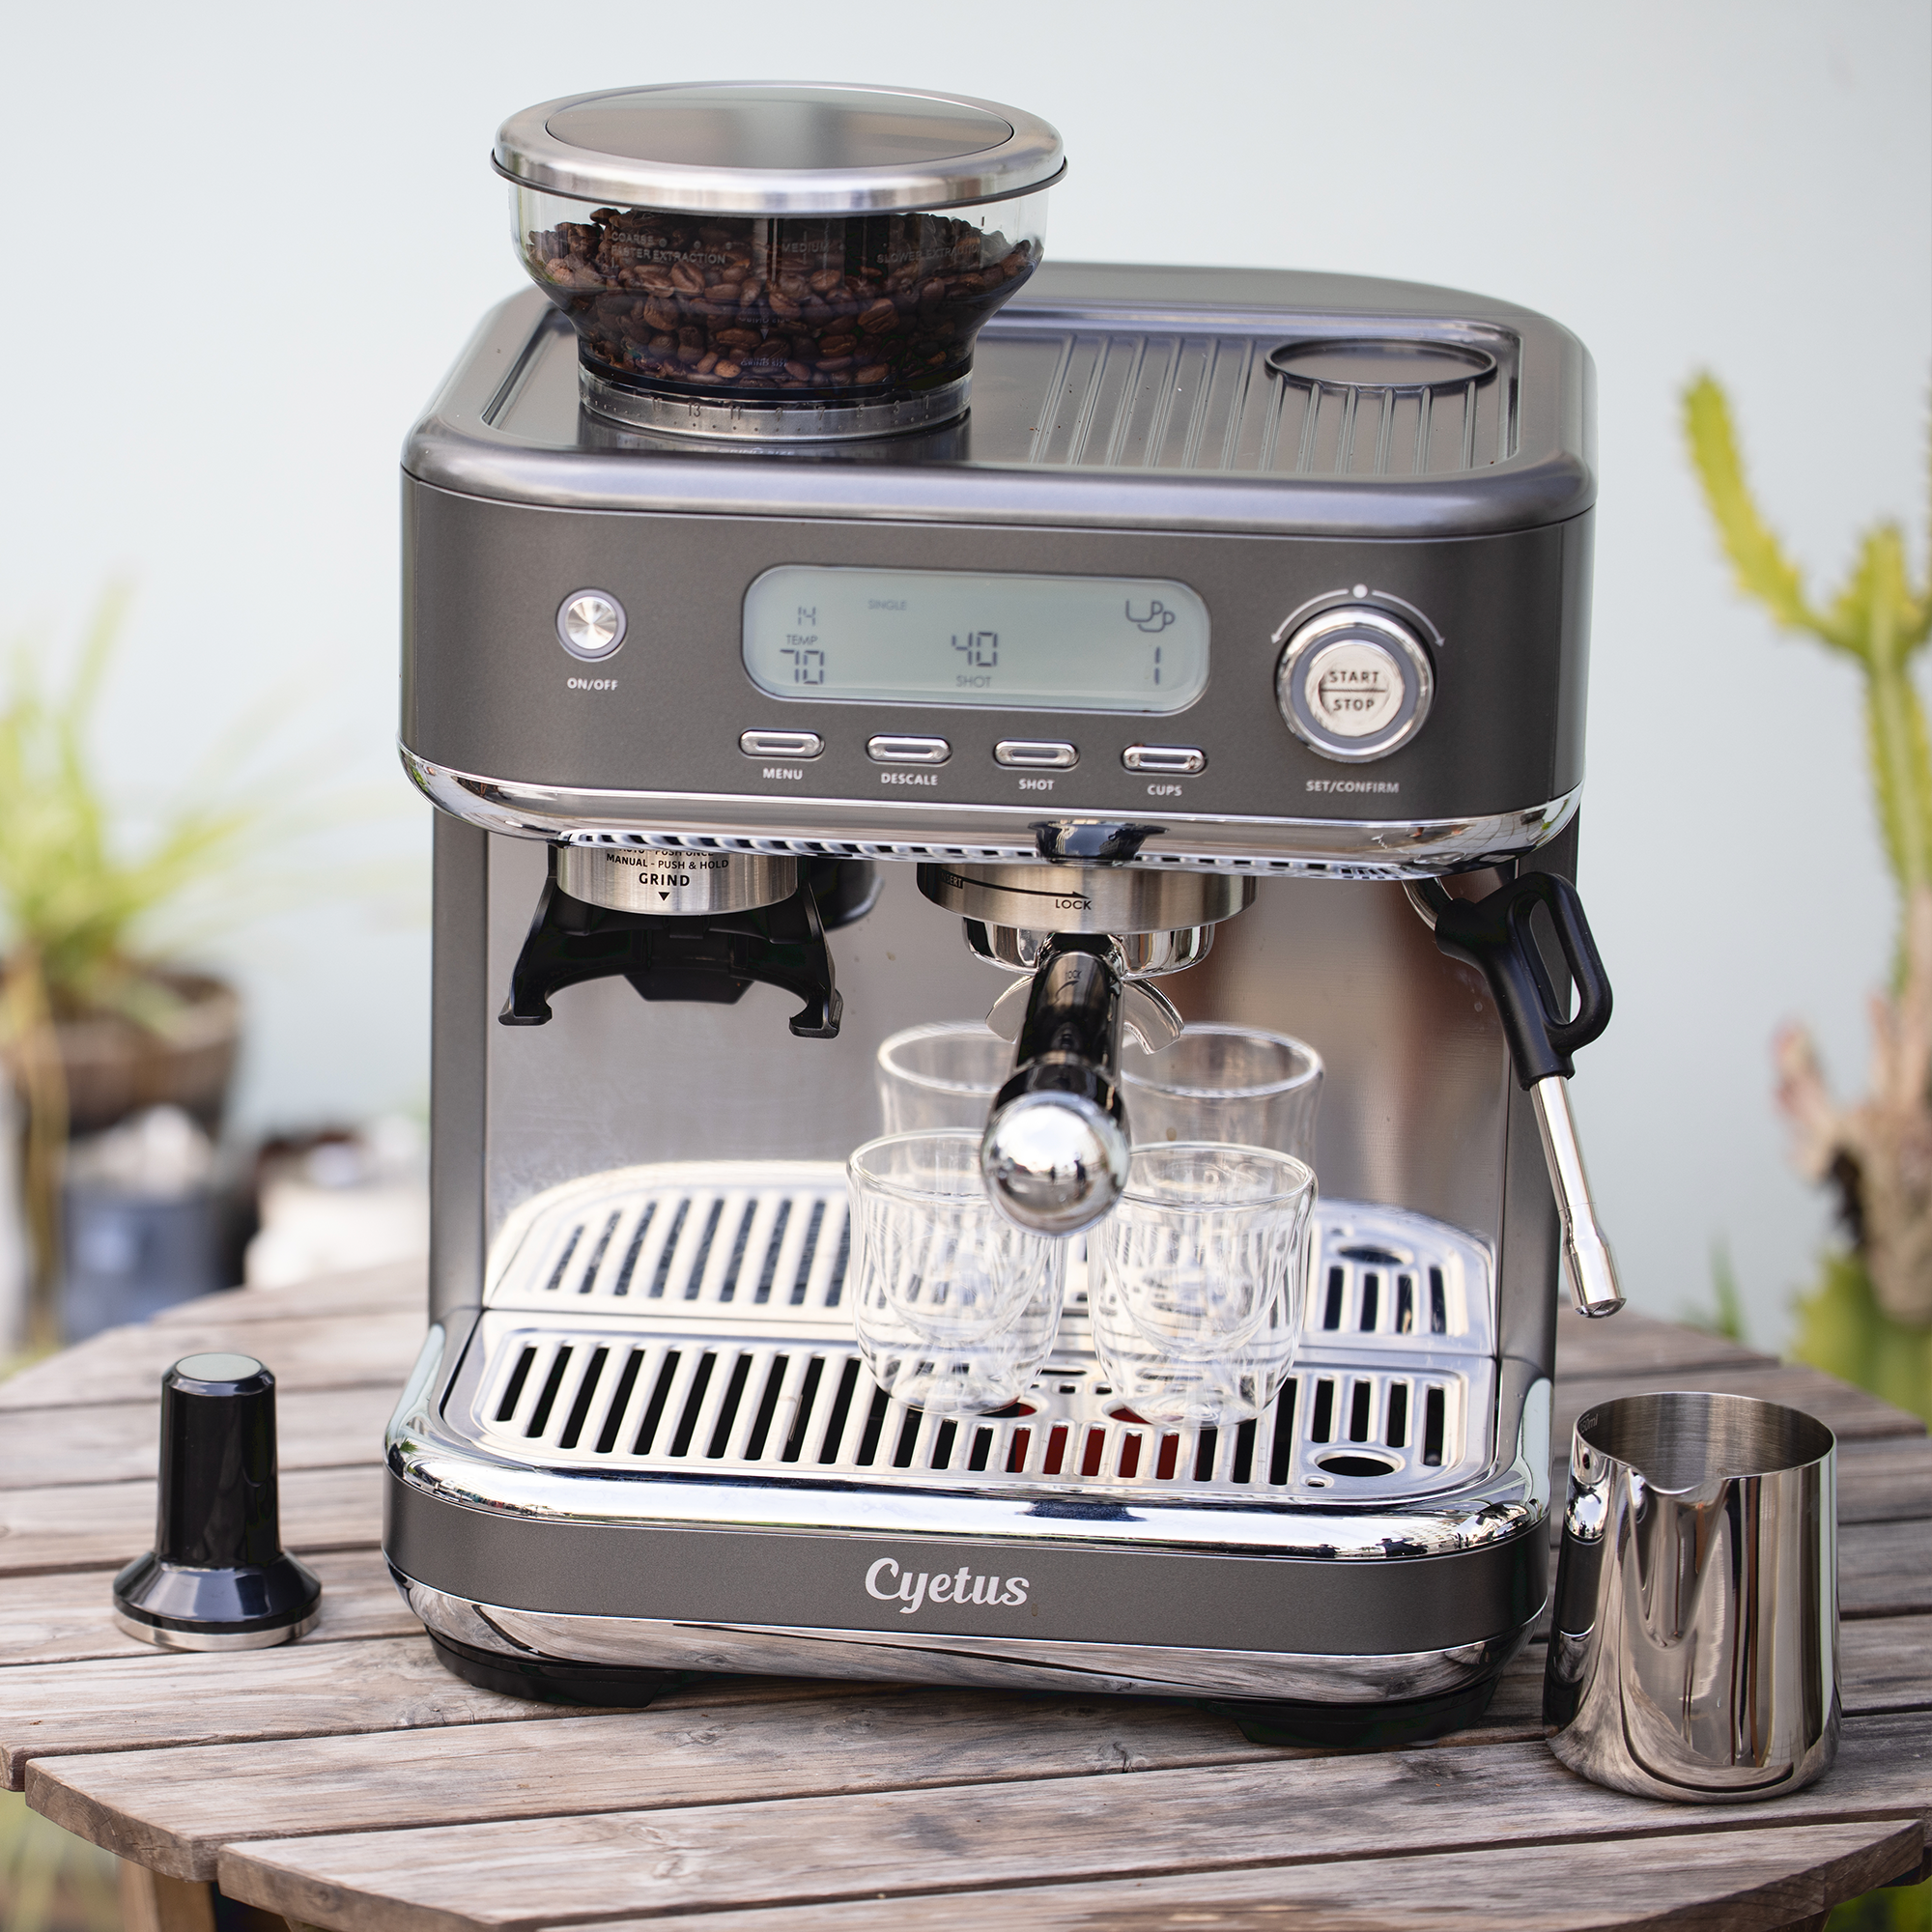 All-in-One Espresso Maker with Grinder and Steam Wand